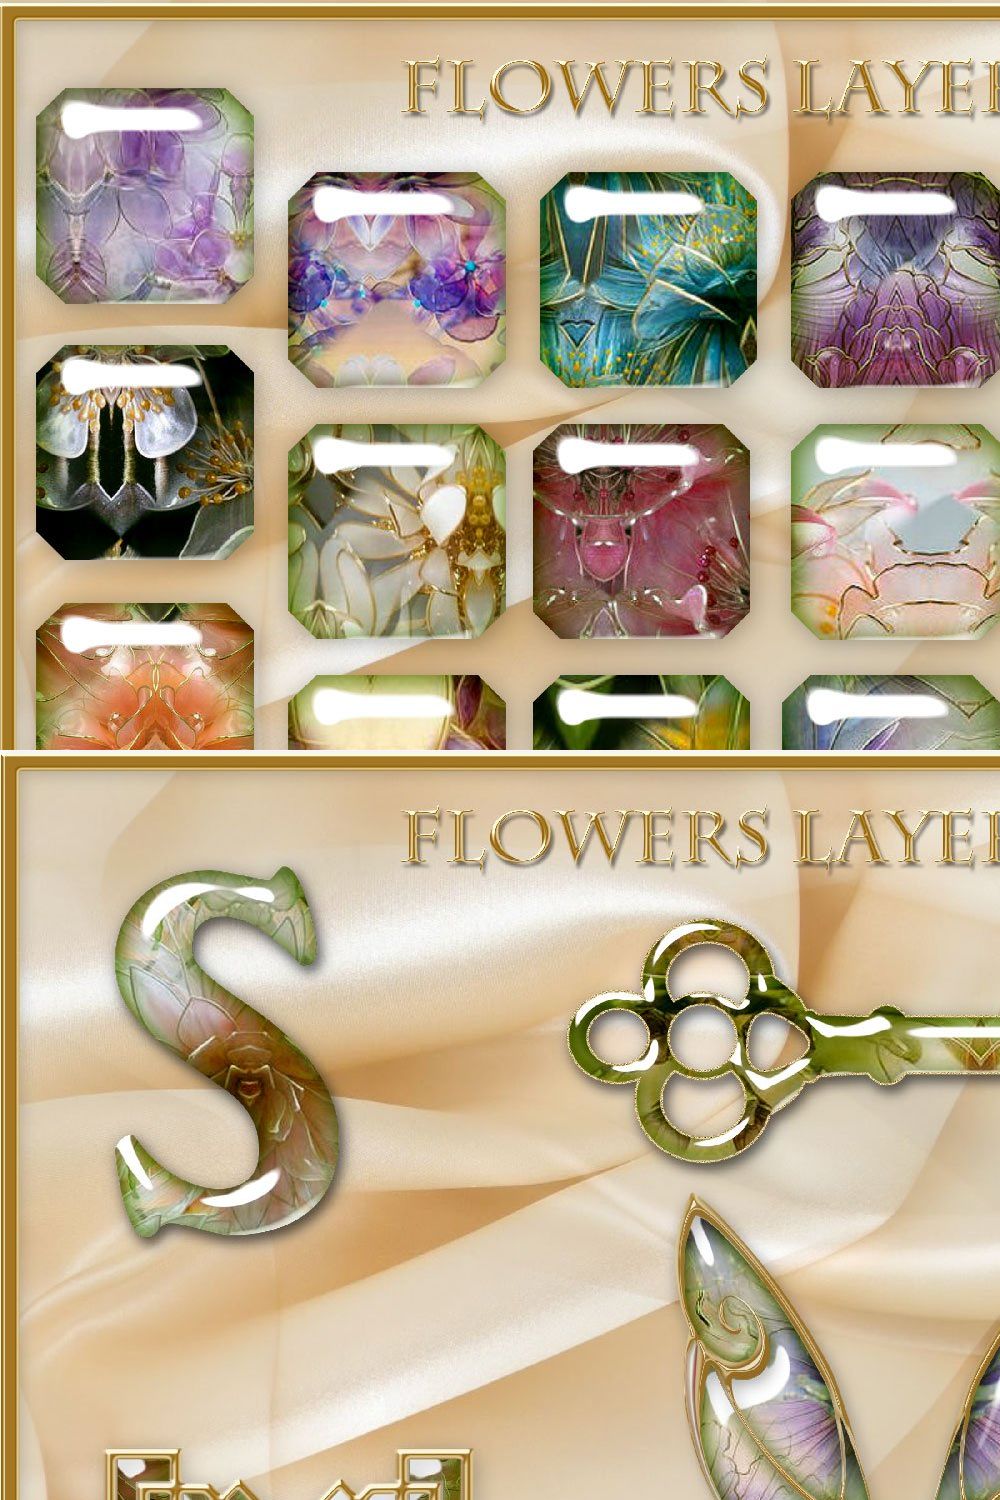 flowers styles pinterest preview image.